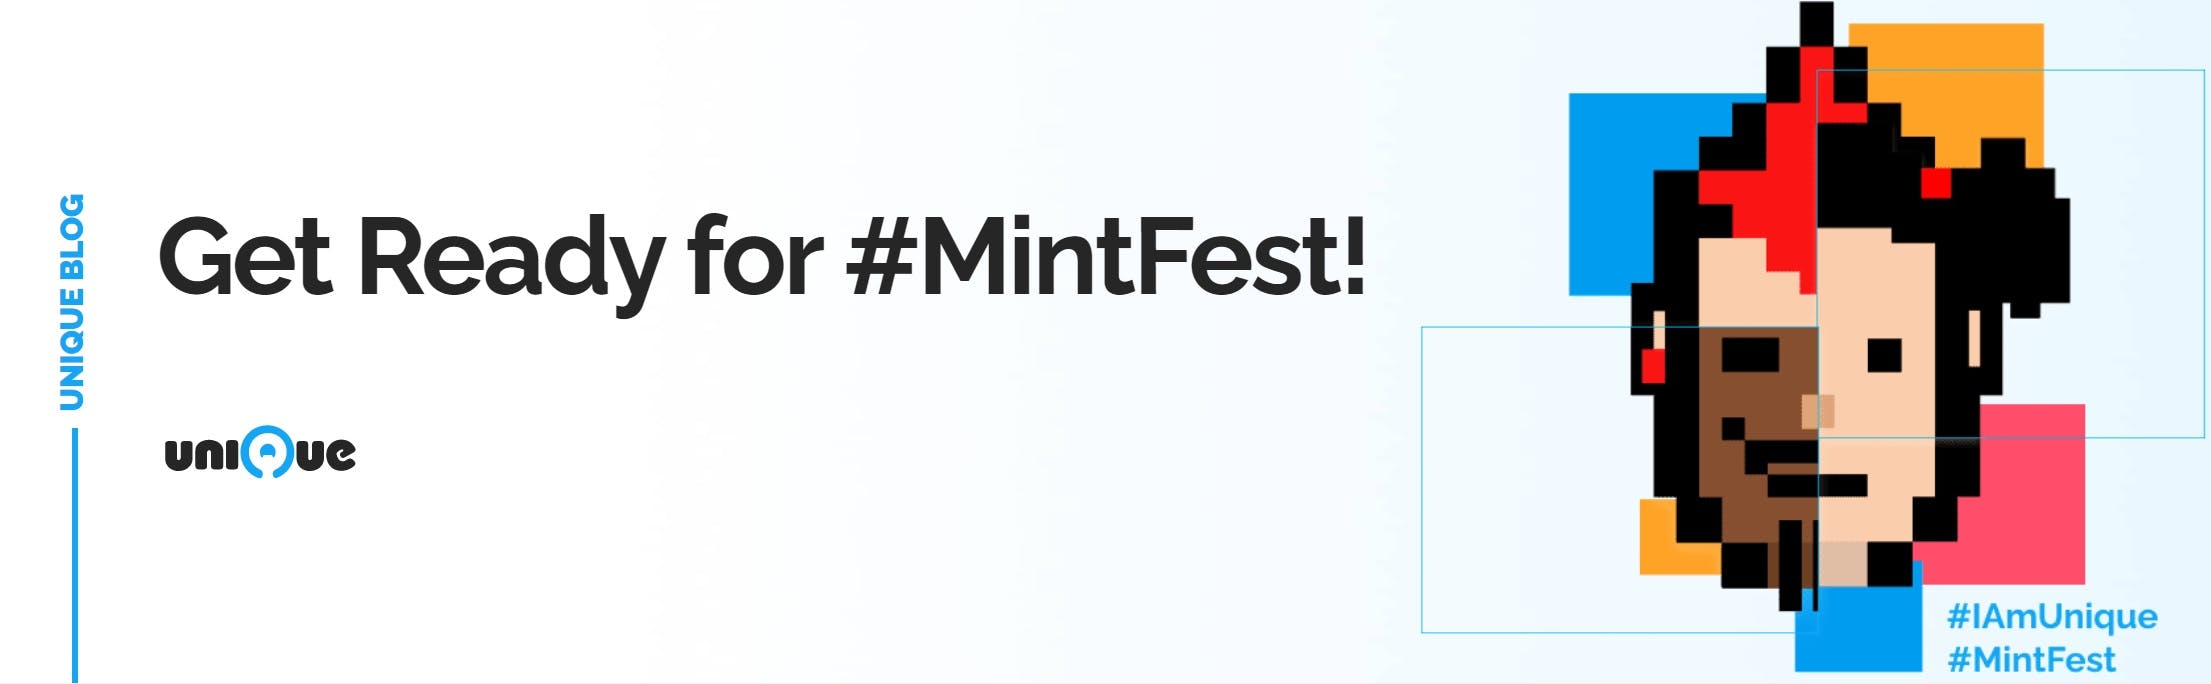 Get Ready for #MintFest!